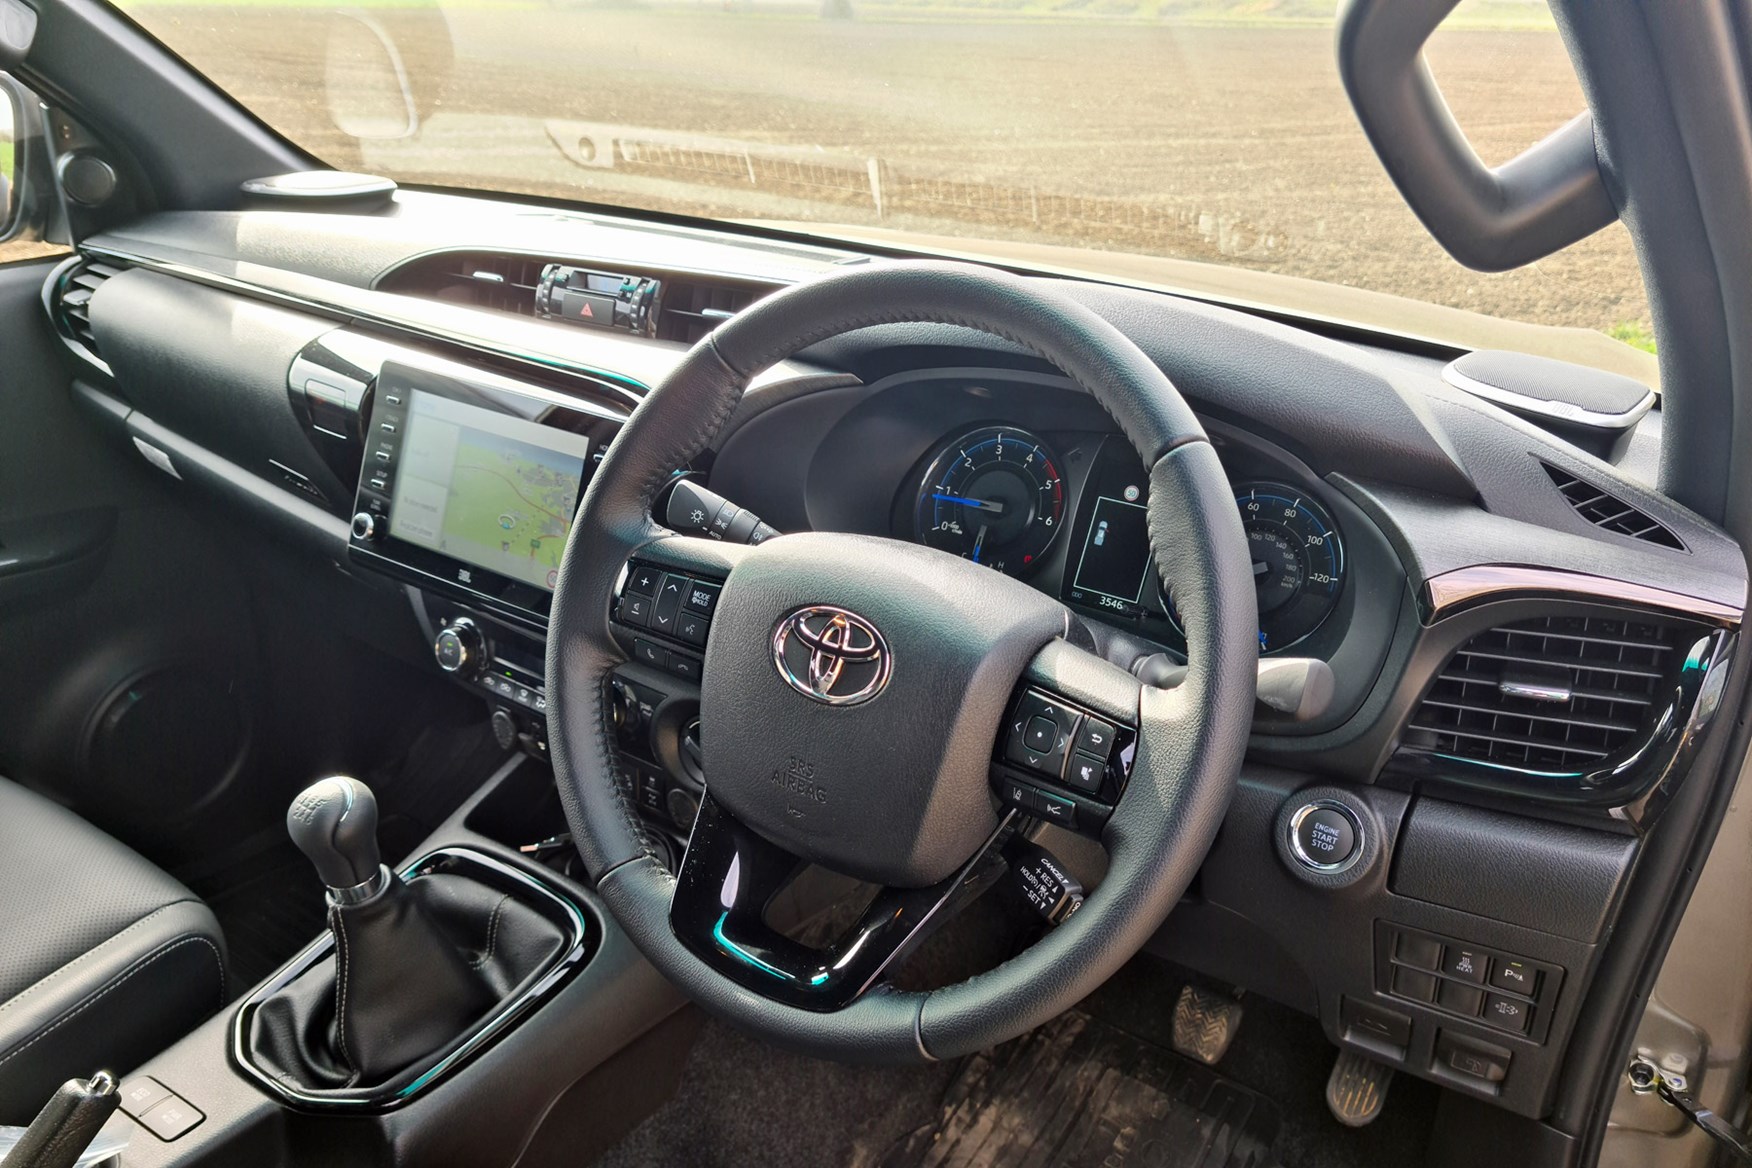 Toyota Hilux Invincible X 2.8D manual review - cab interior, dashboard, sat-nav, Toyota Touch 2 infotainment